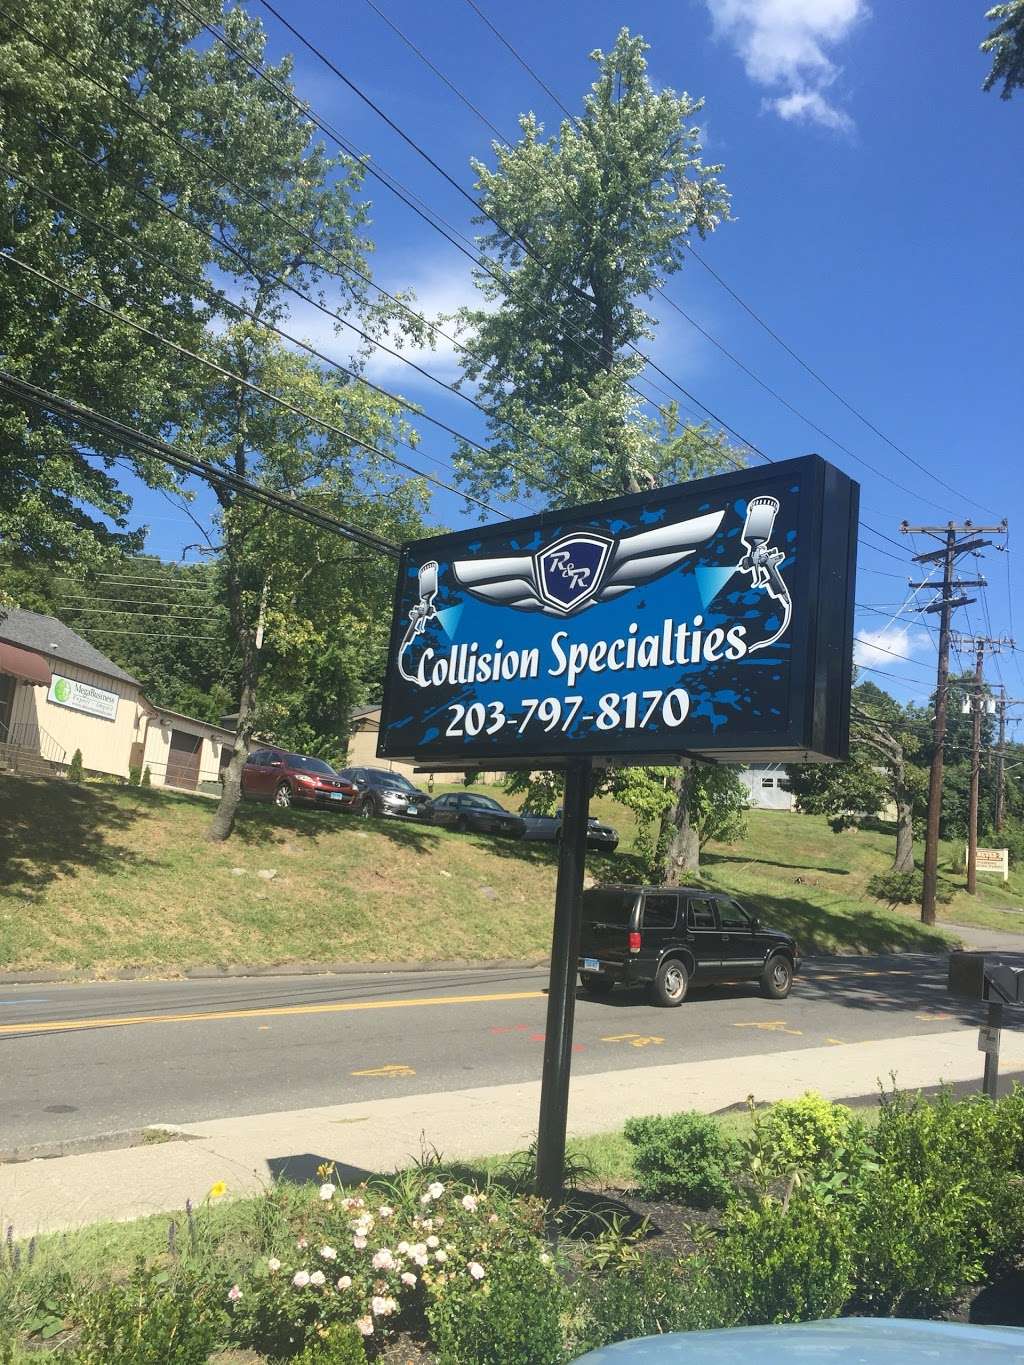 R & R Collision Specialties | 7050, 80 Shelter Rock Rd, Danbury, CT 06810 | Phone: (203) 797-8170